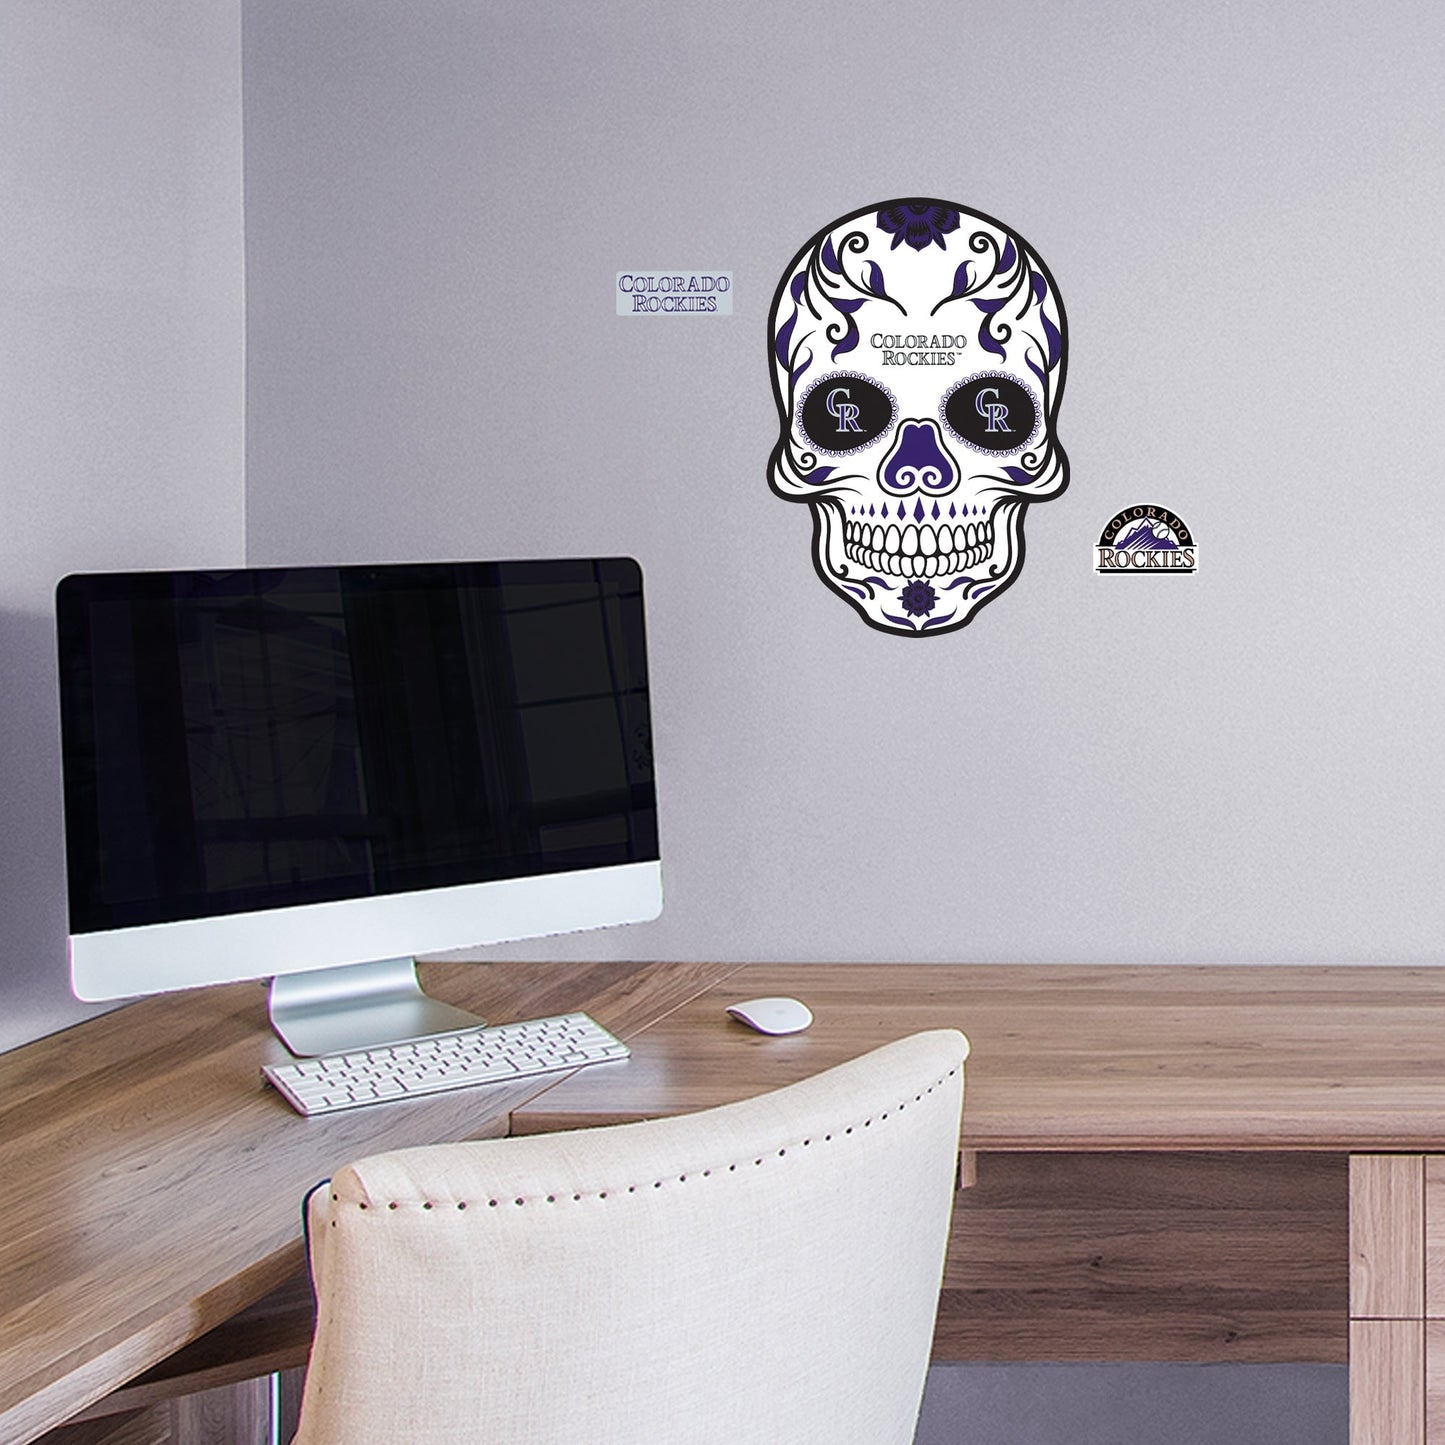 Colorado Rockies: Skull - Officially Licensed MLB Removable Adhesive Decal